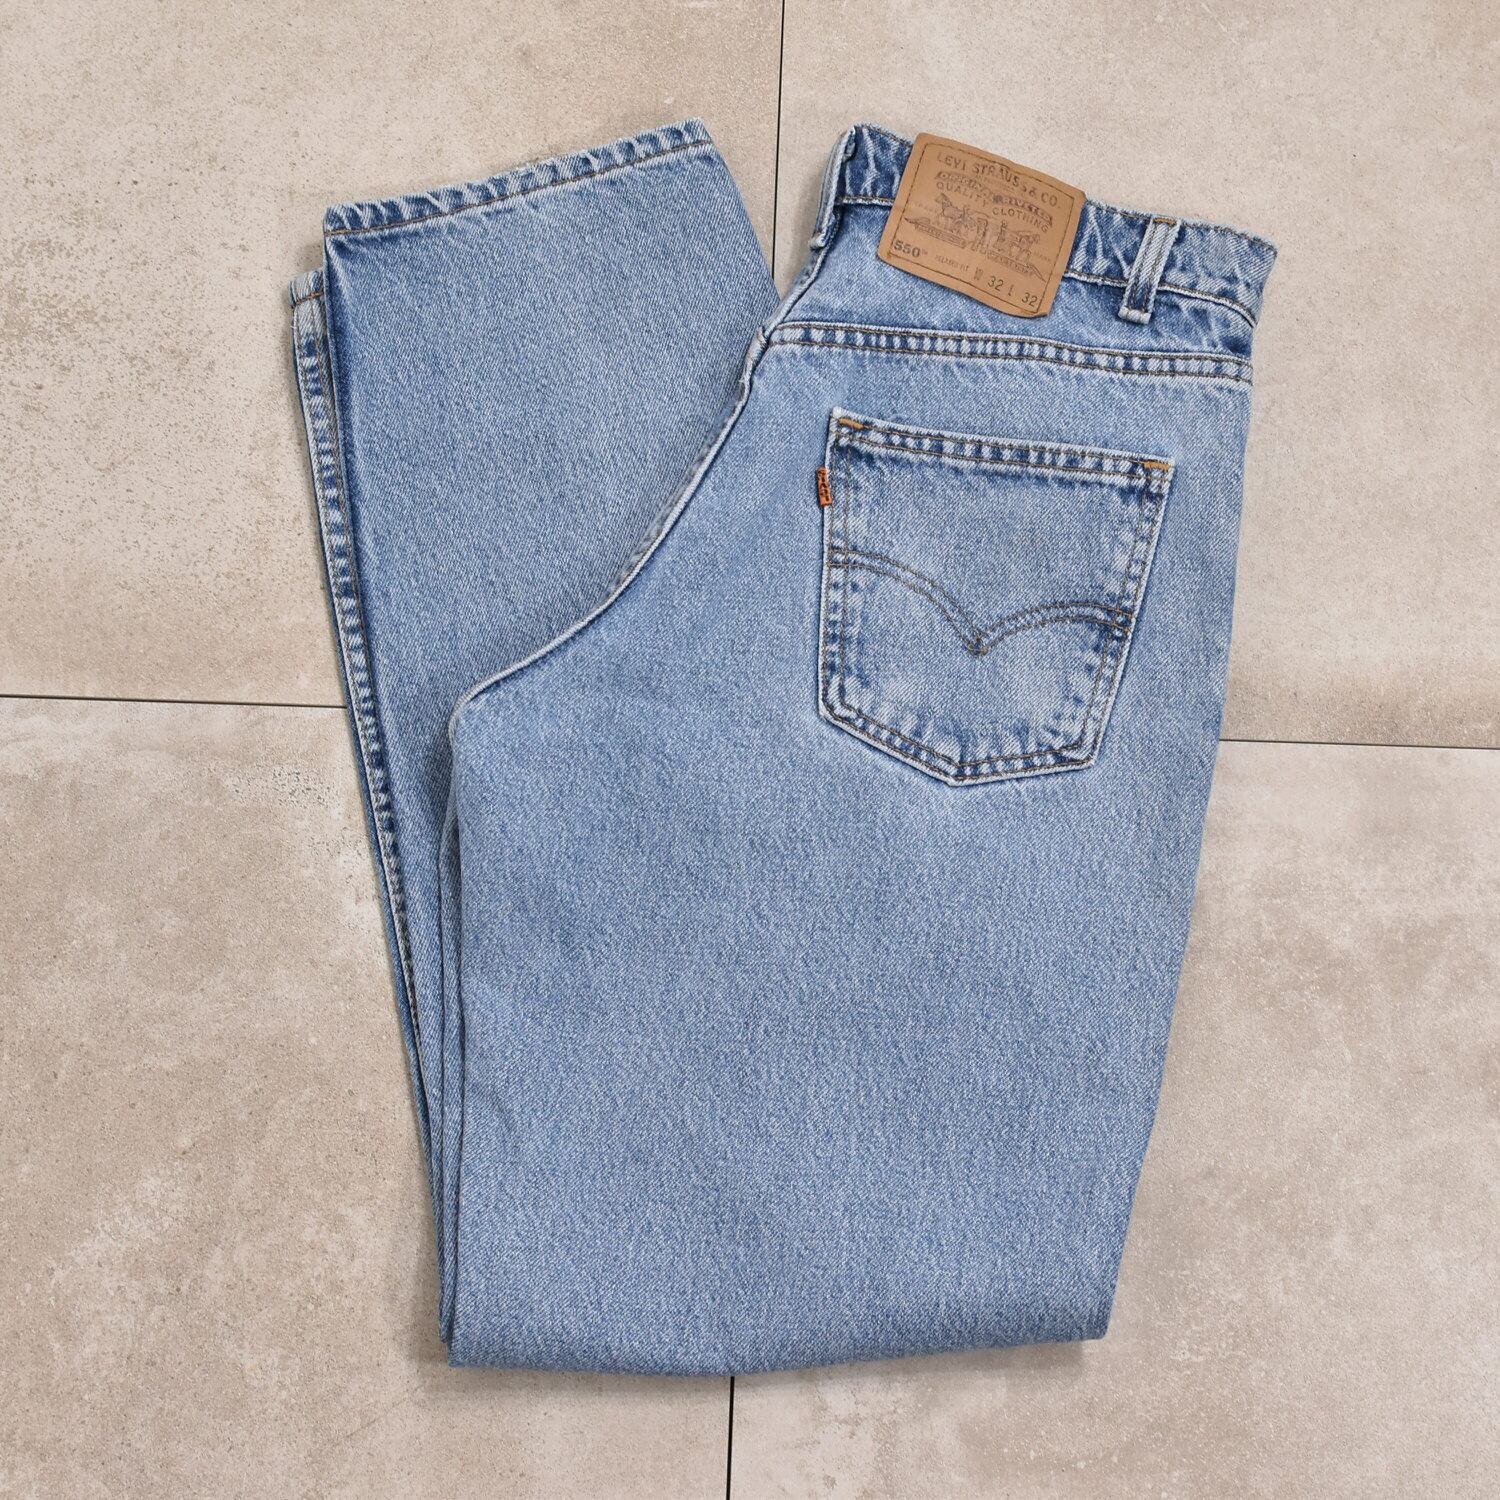 90s USA Levi's550 Relaxed Fit denim pants